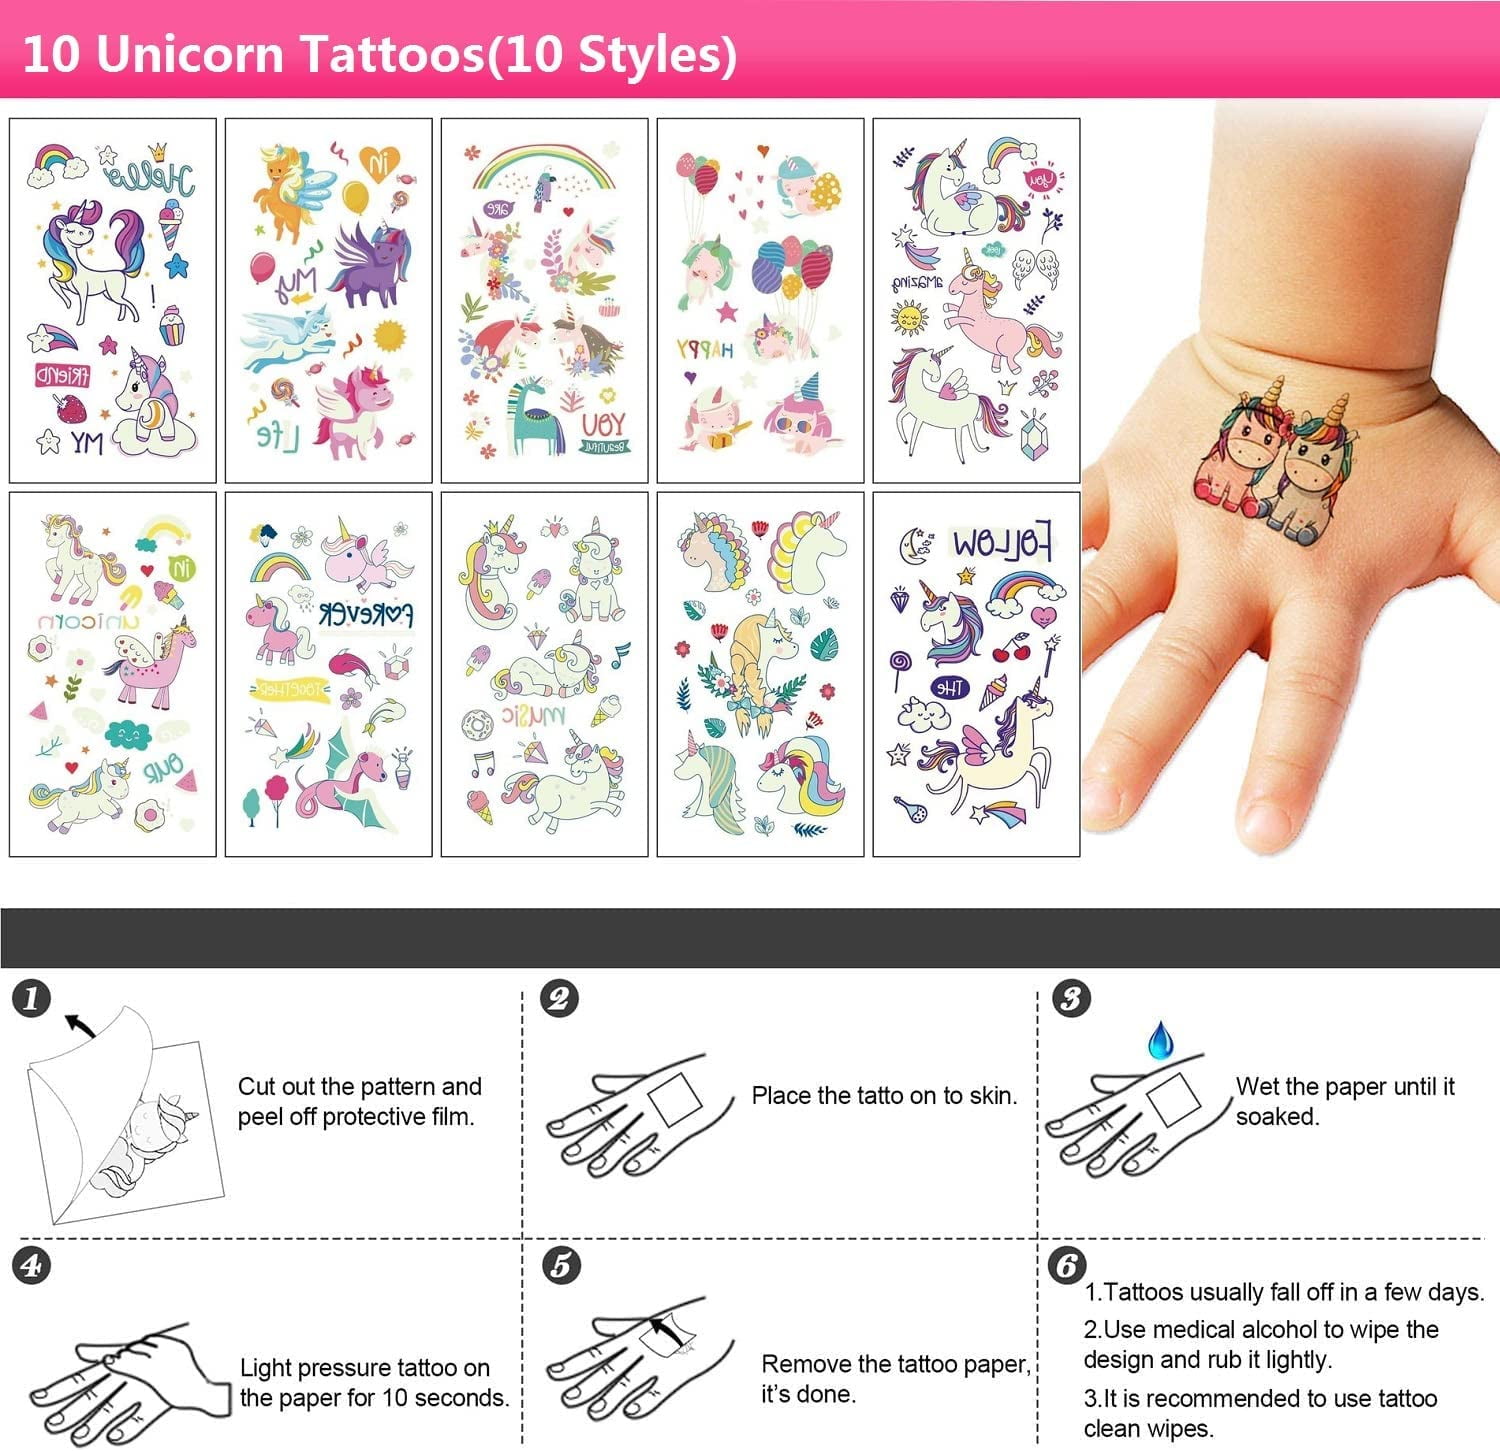 Americasfavors Unicorn Party Favors for Kids Bundle (12 of Each Item) Slime, Bags, Rings, Tattoo & Keychains